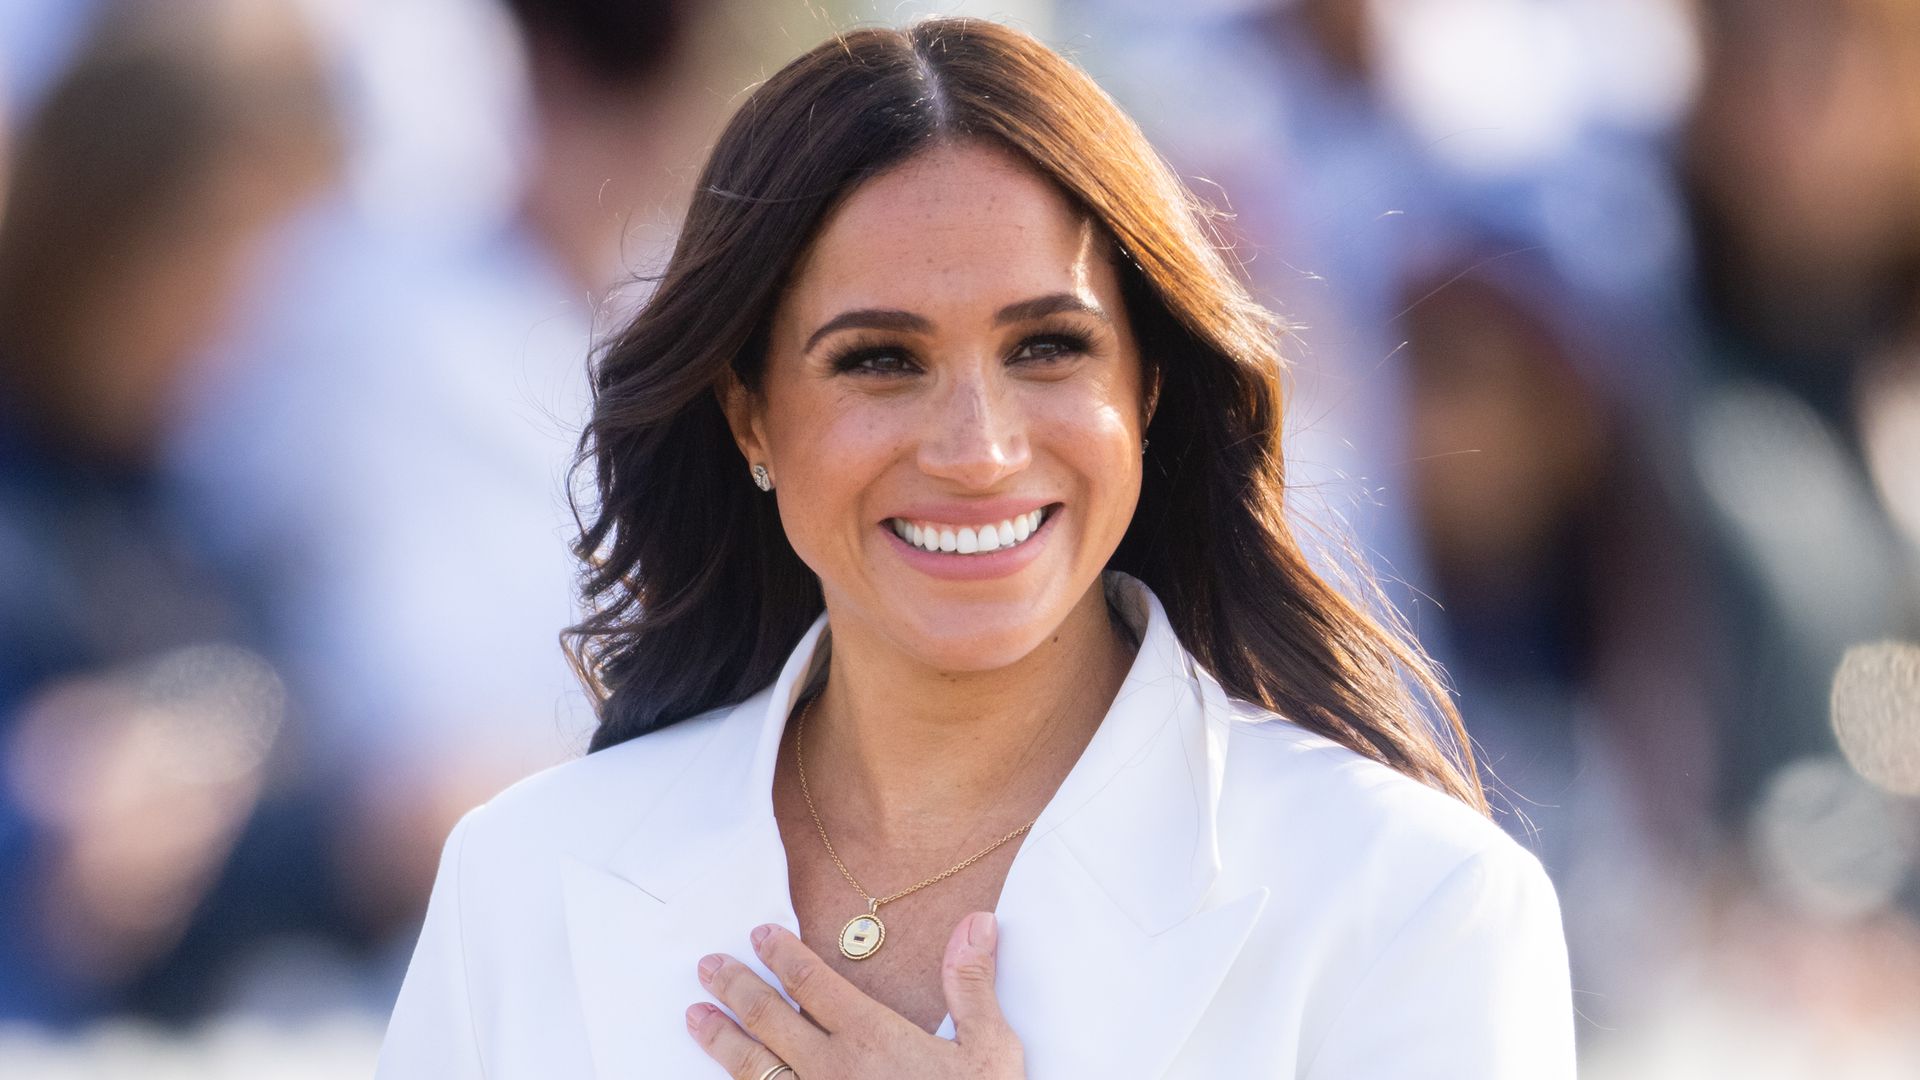 Meghan Markle's Latest Look? An Under-$100 Top and Leather Pencil